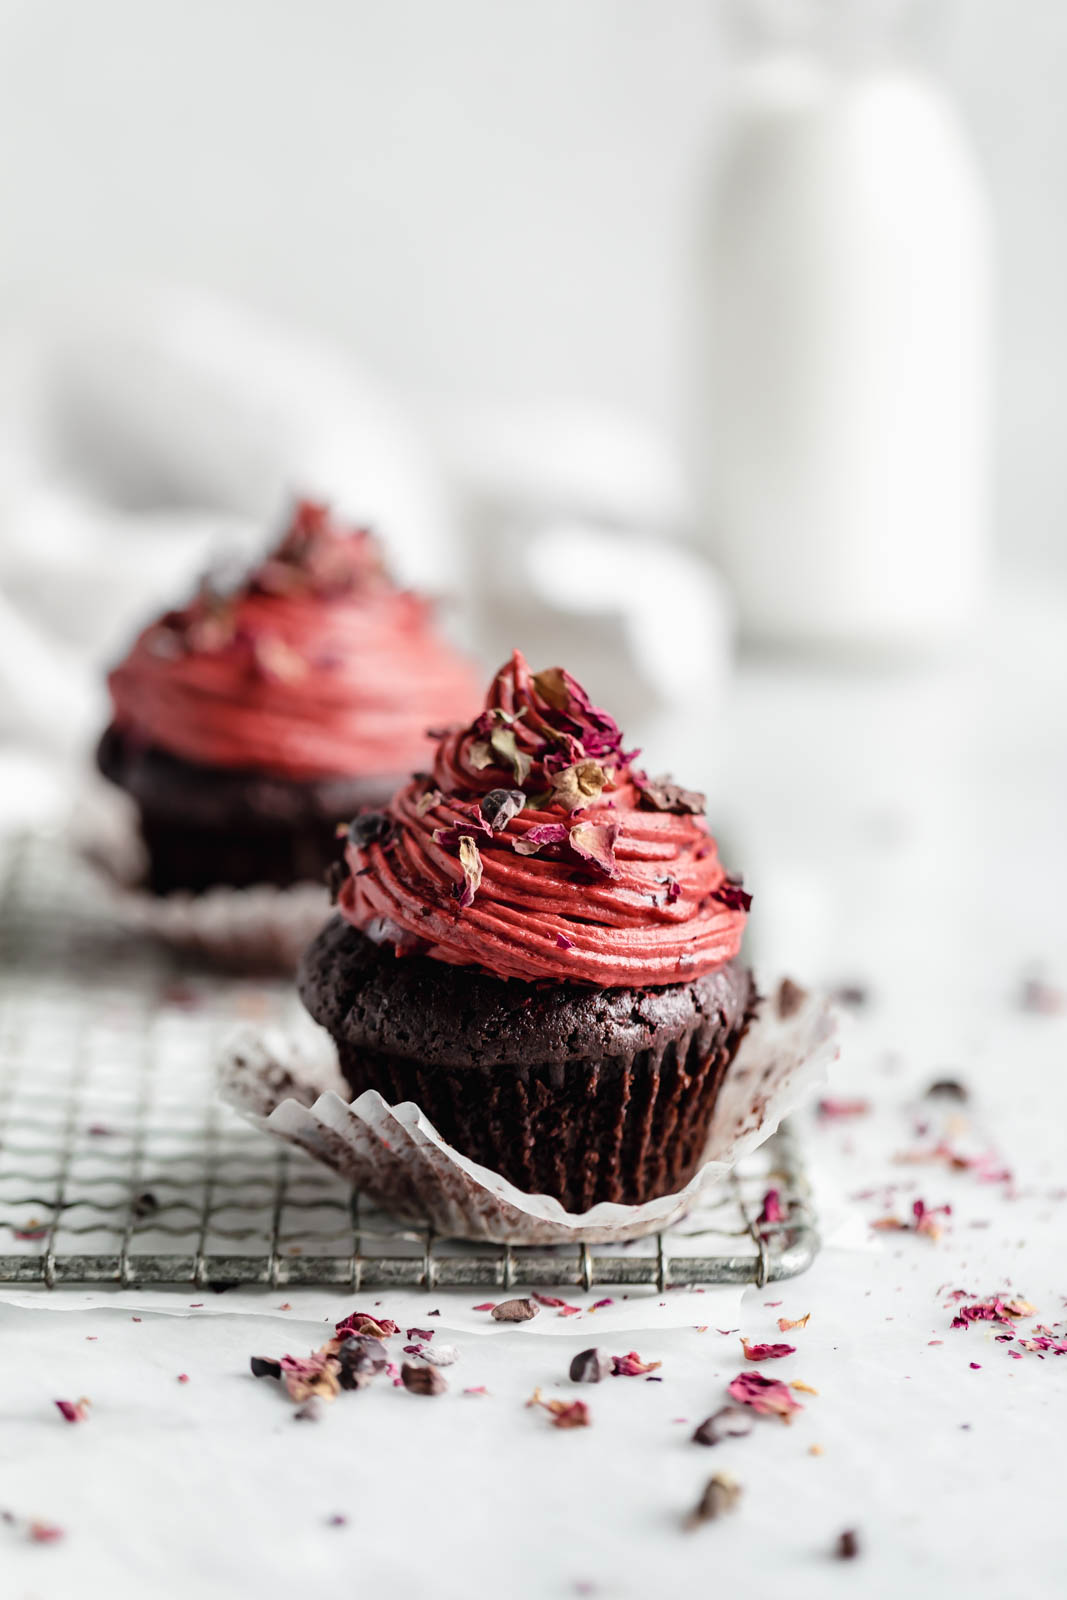 Raspberry Rose Chocolate Cupcakes for Two: one for you, one for your boo. Or two for you, because no one is judging here!